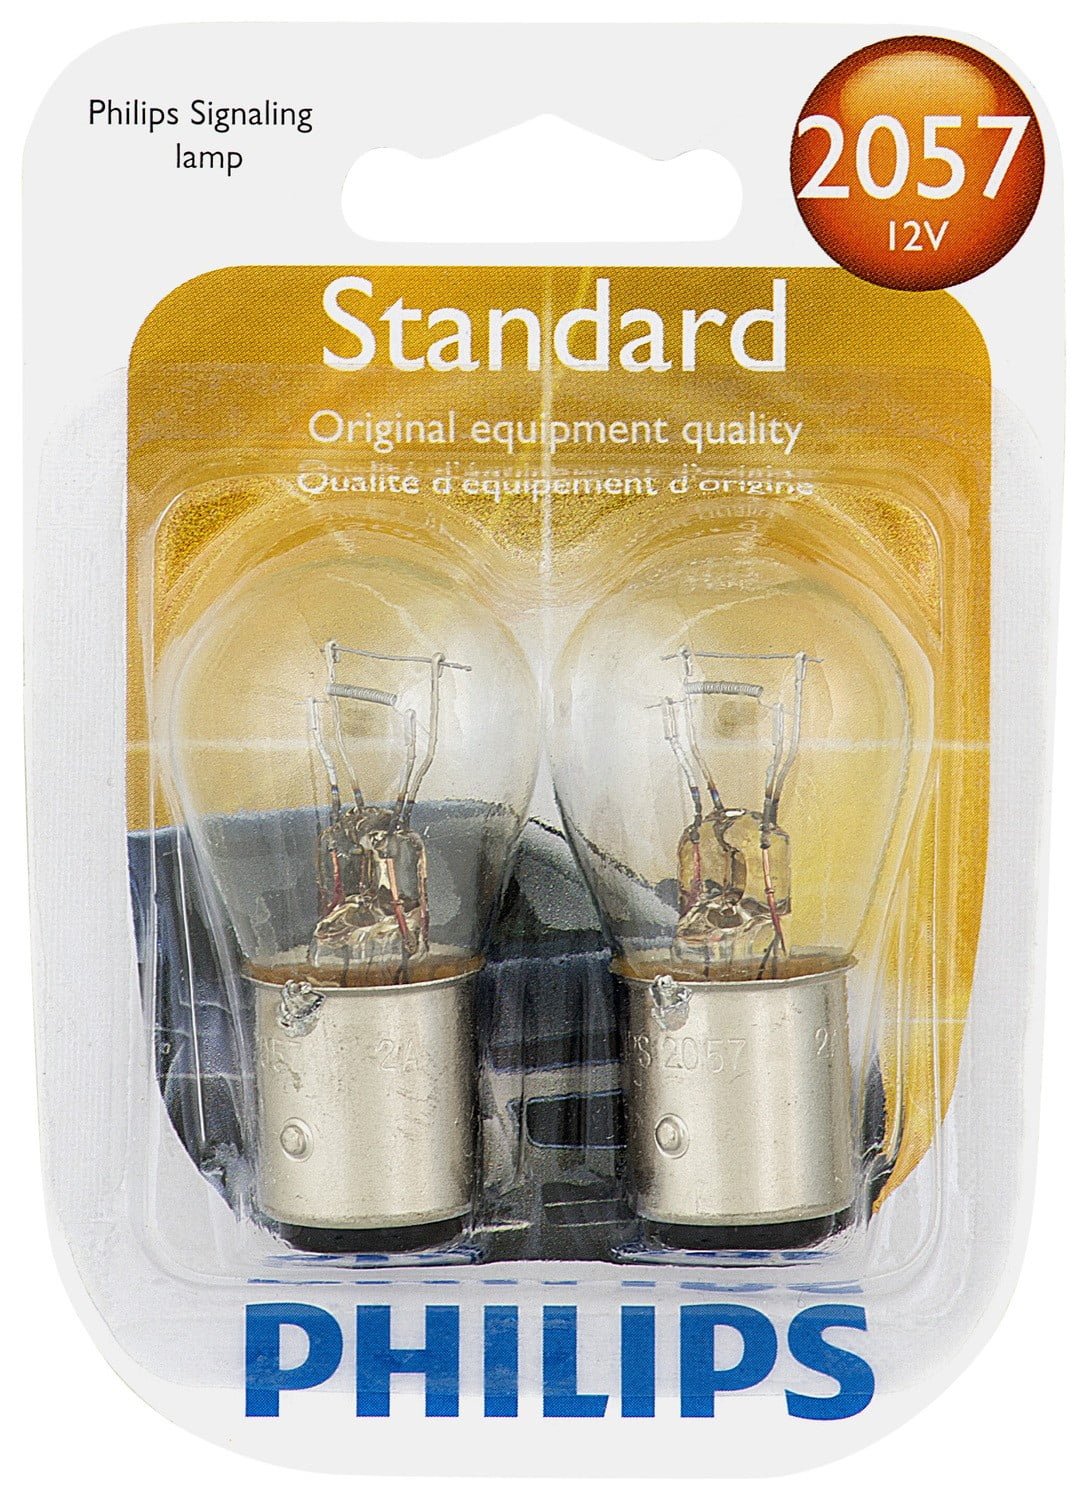 Turn Signal Light Bulb-Standard Single Commercial Pack Front Philips